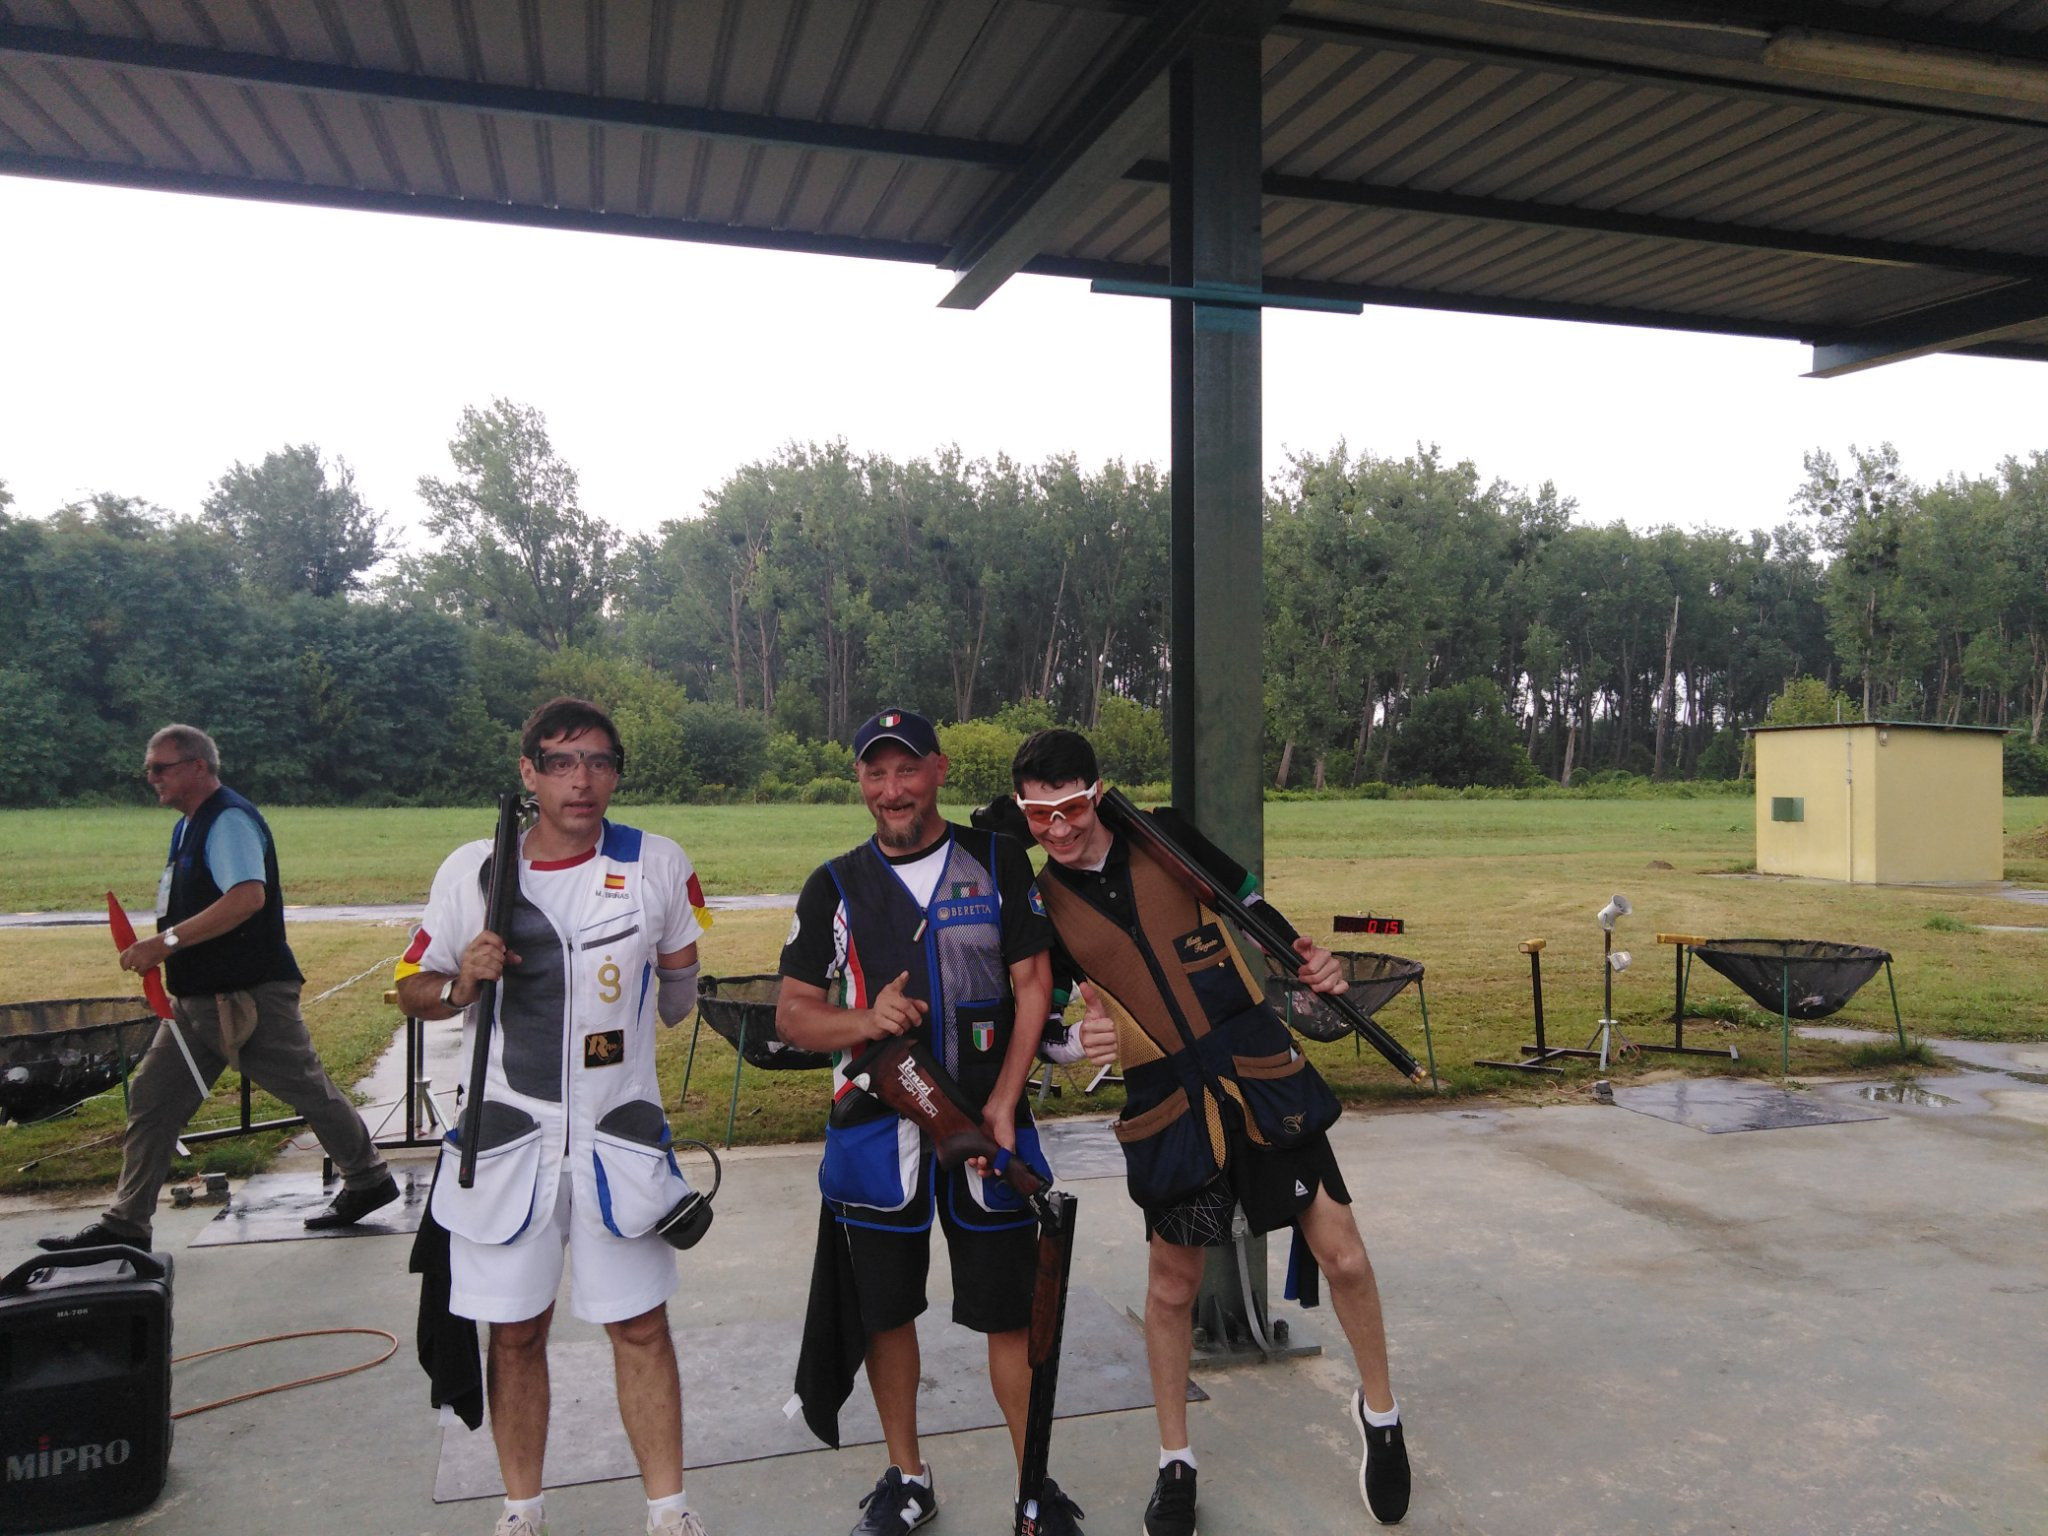 Italy secure double gold and Jokic sets world record at World Shooting Para Sport World Cup in Osijek